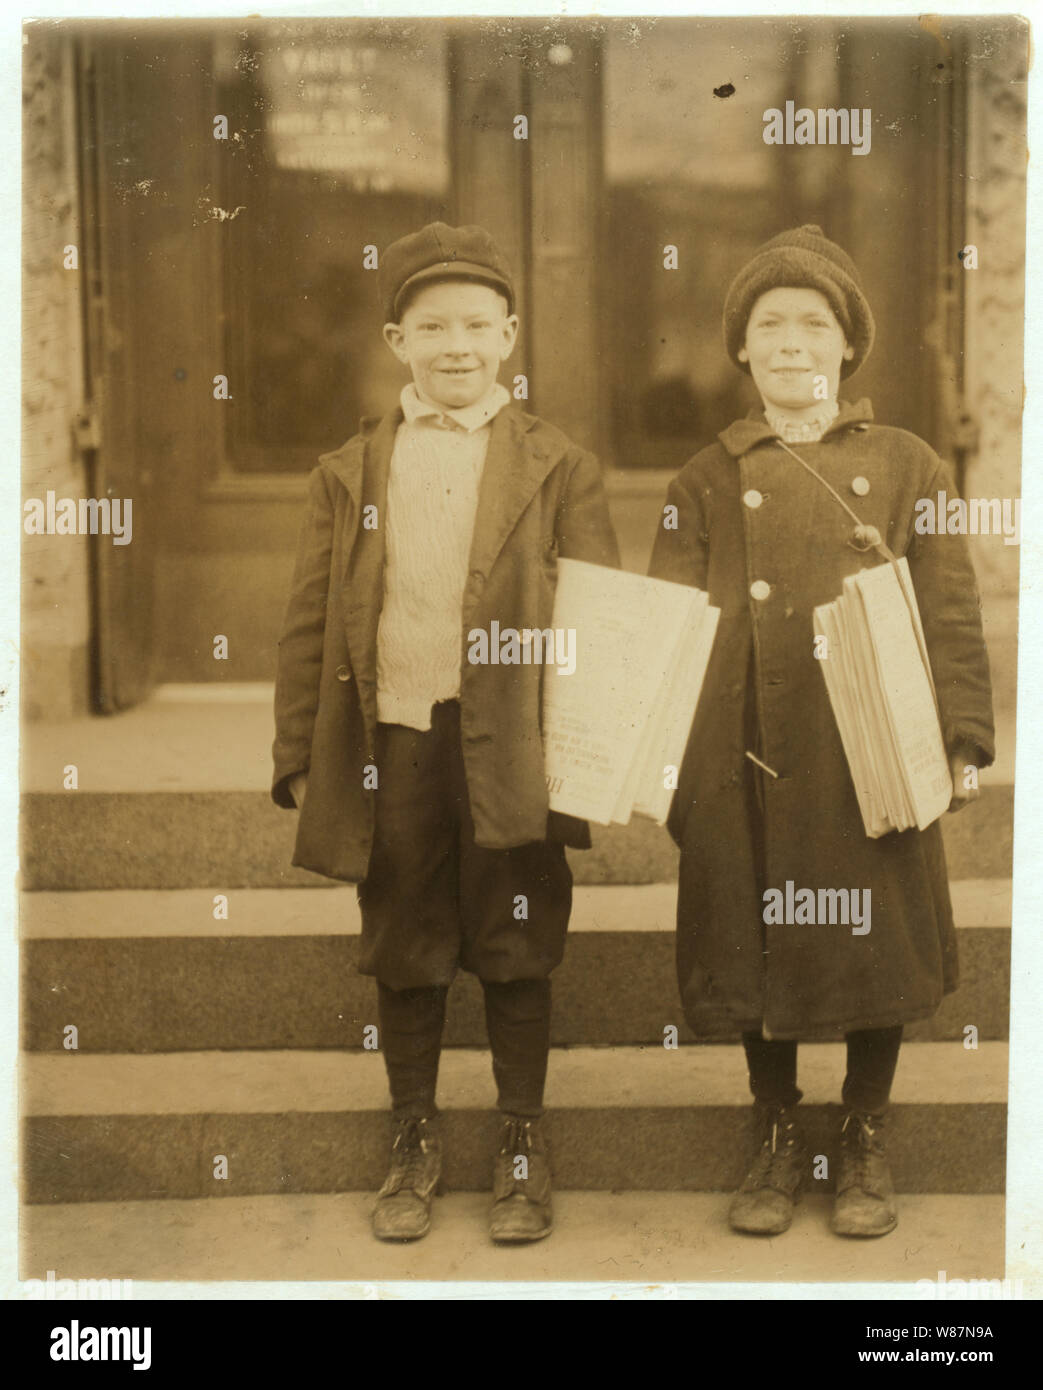 3 P.M. Teddy and Lester (on right) - both 9 yrs. old - and sell until 8 P.M. Stock Photo